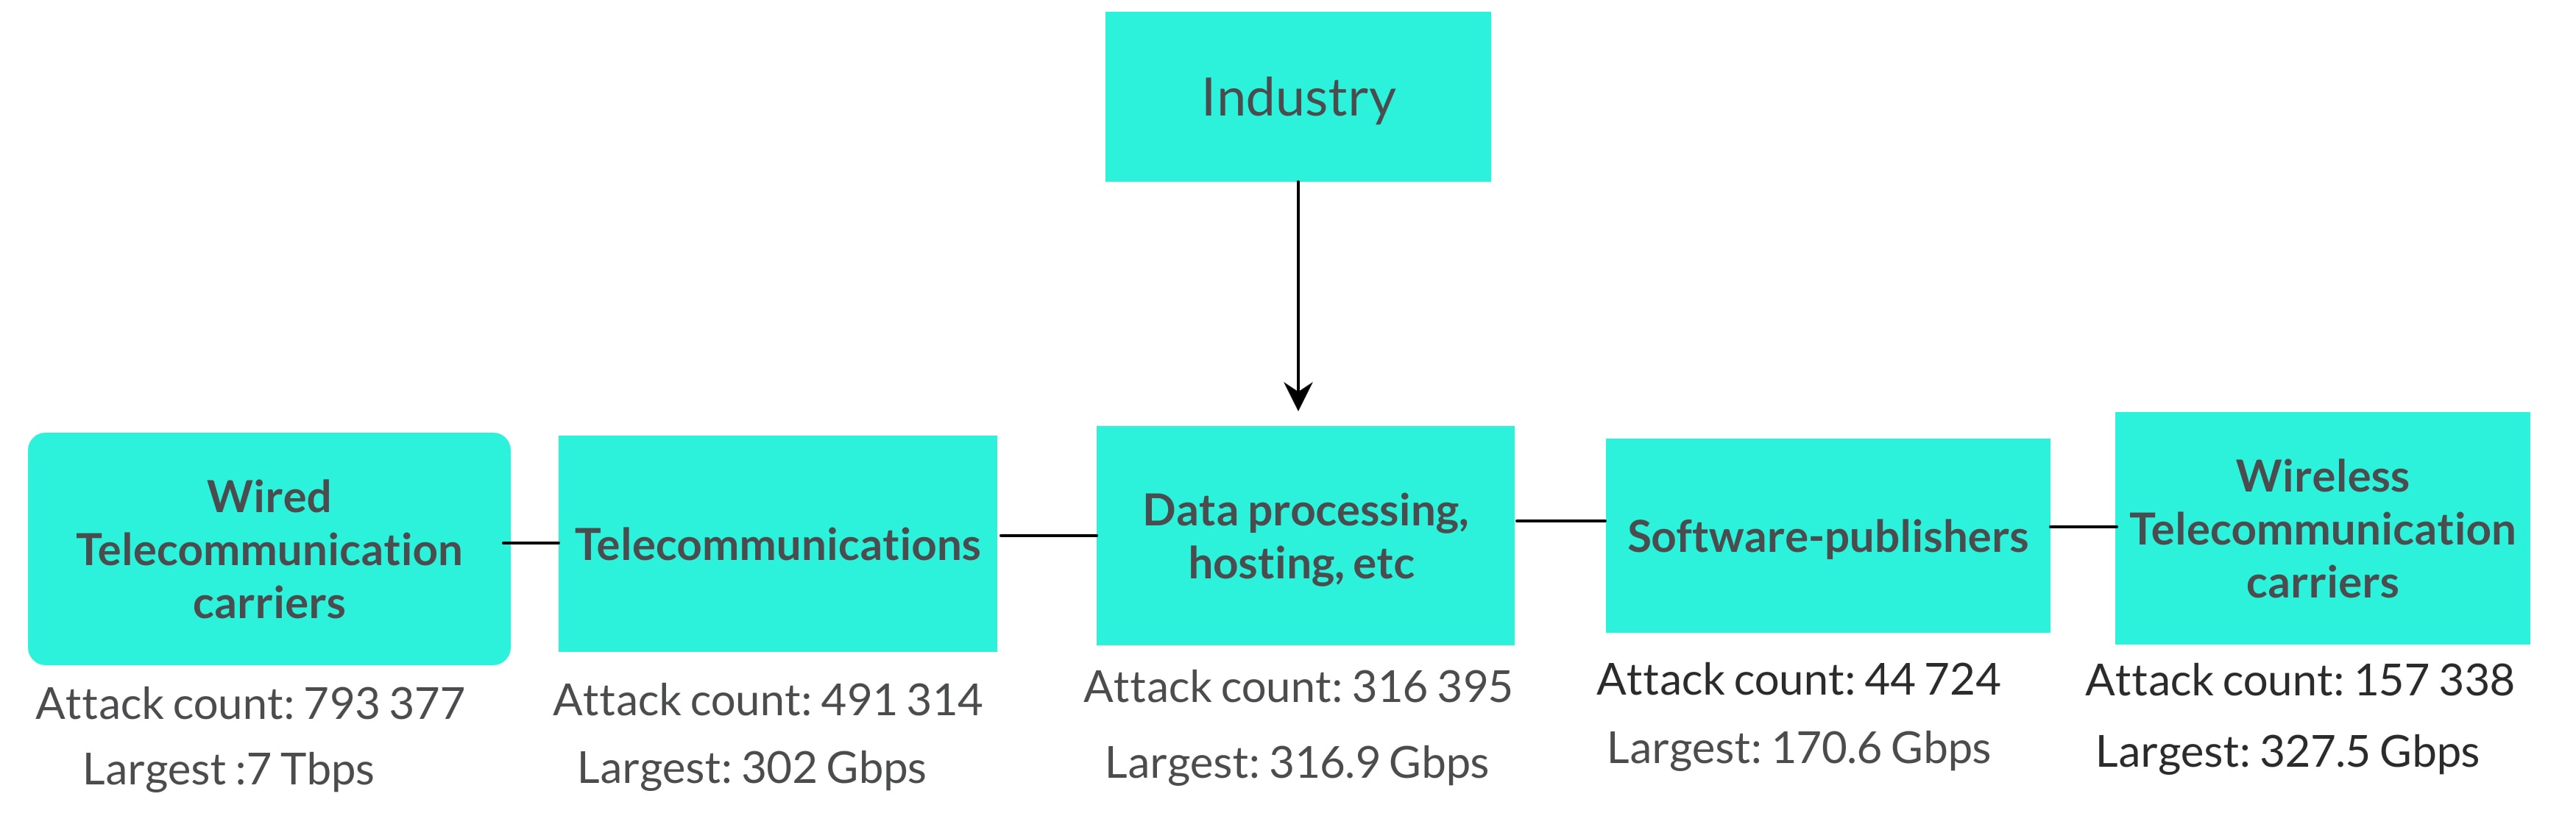 Chart showing the industries most affected by DDoS cyber-attacks in 2018, as well as the number of attacks and the size of the largest attack per industry.